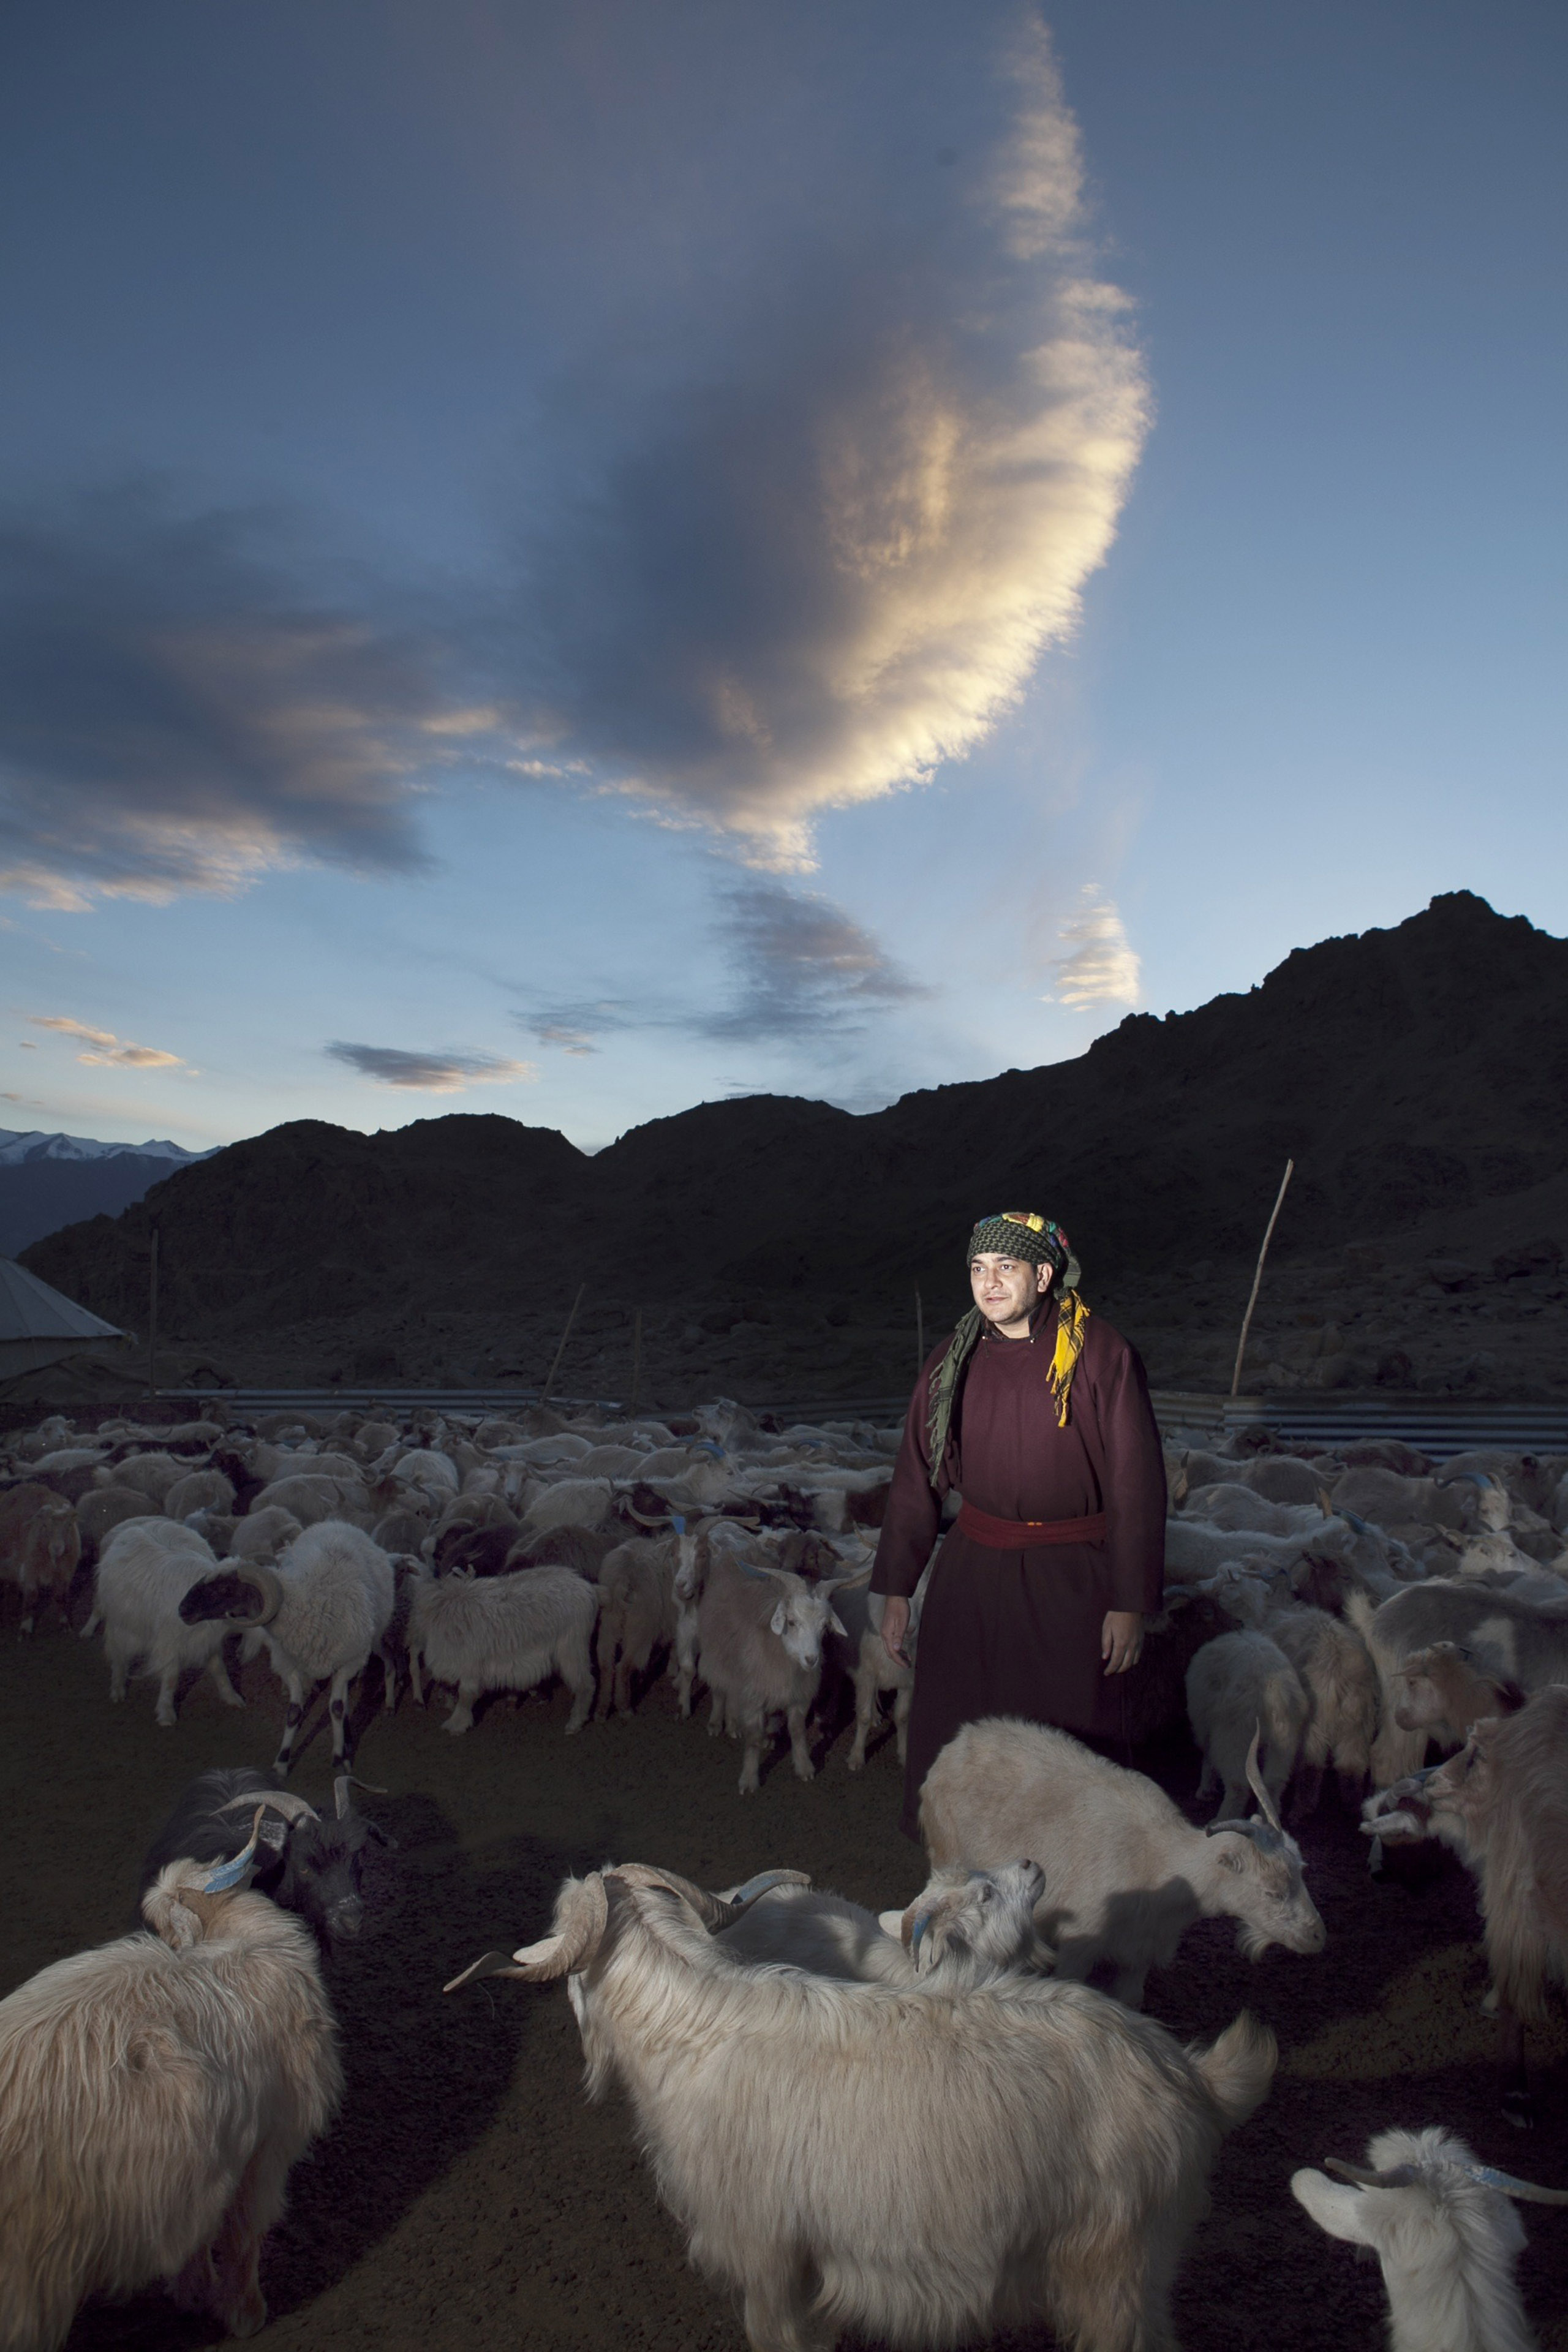 Babar Afzal in Stakmo village, situated on the outskirts of Leh. He helps Tsering Dolma with her daily chore of rounding up the goats, counting them and securing for the night. (Photograph by Sumit Dayal for time)